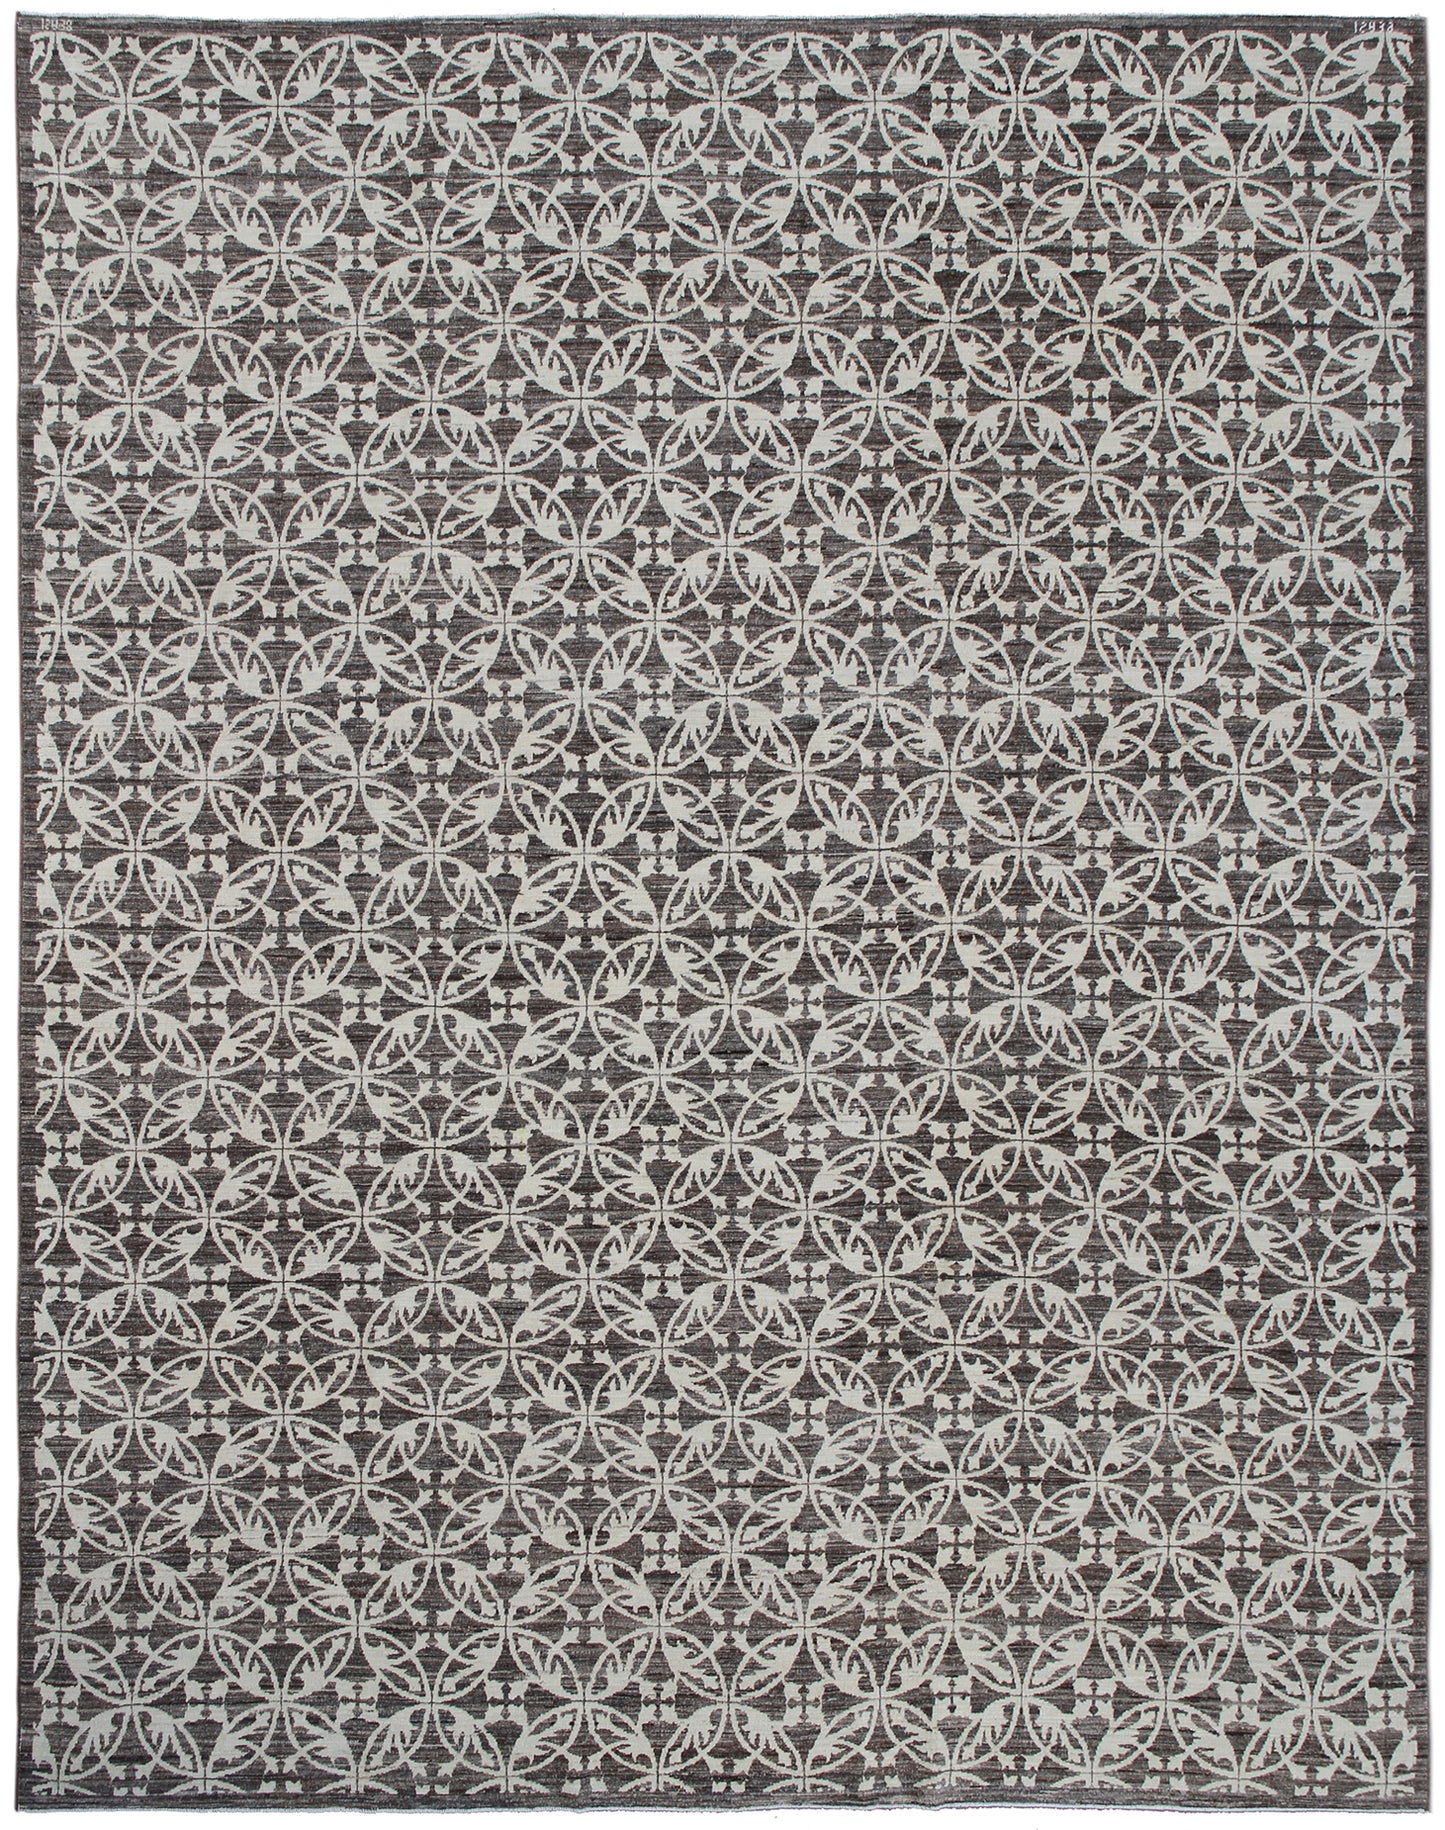 9.07 x  8.01 Brown And Ivory Geometric Contemporary Ariana Modern Area Rug